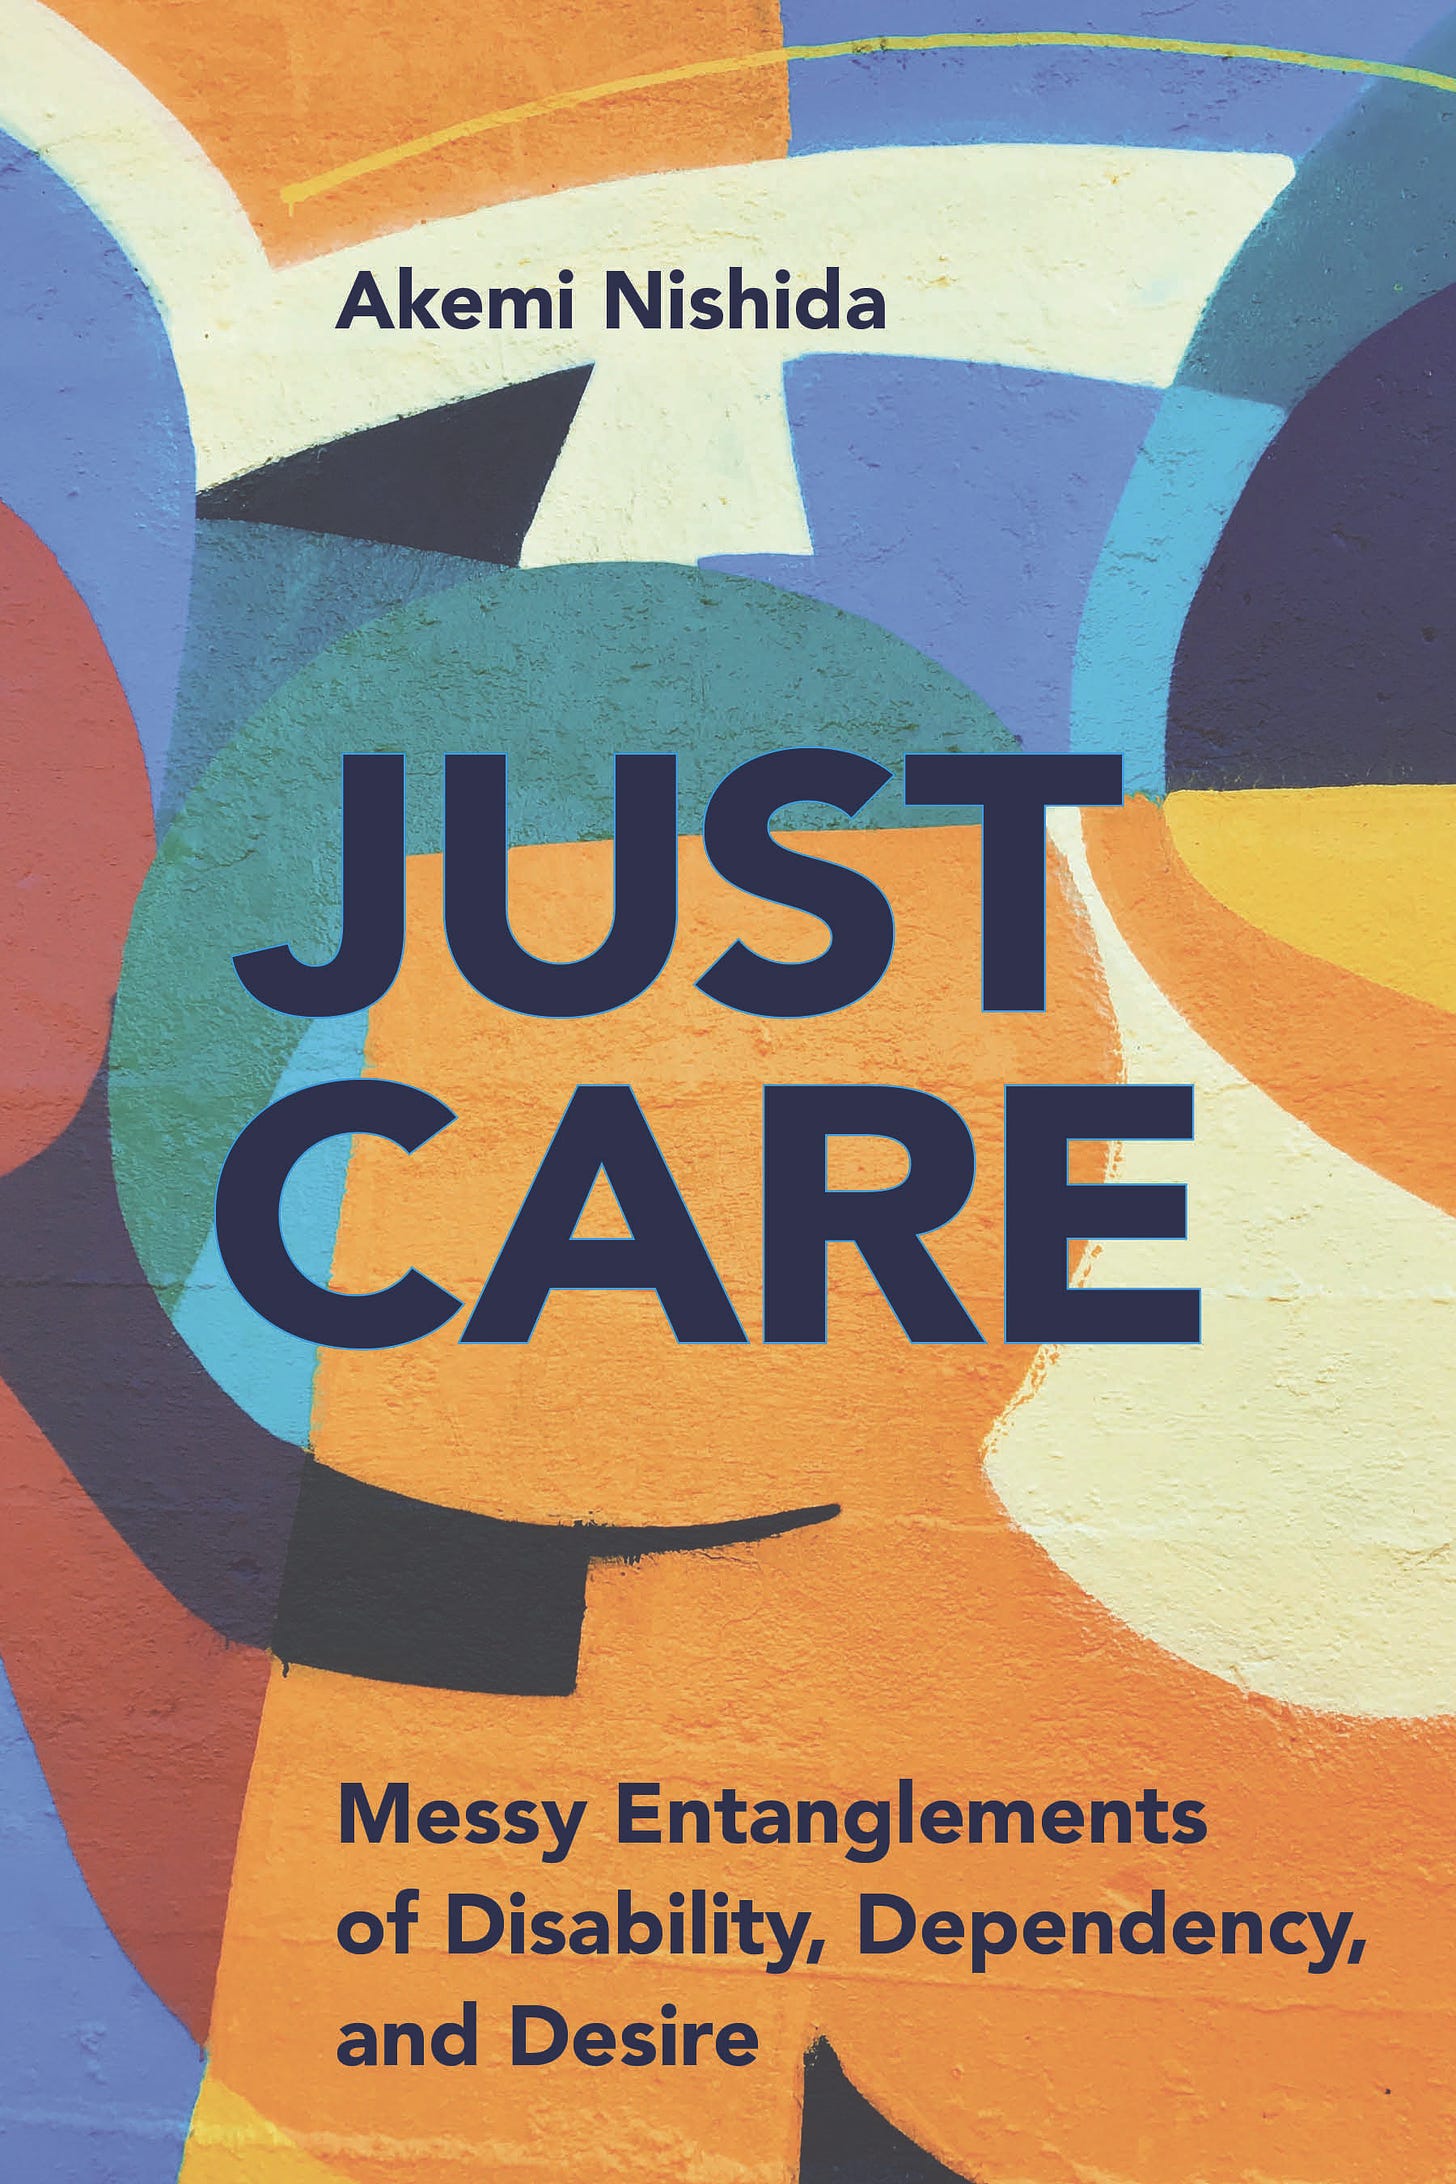 The cover of Akemi Nishida’s book Just Care is an abstract painting of overlapping color swirls/panels in shades of yellow, blue, red, and white (images from unsplash.com). The text reads Just Care: Messy Entanglements of Disability, Dependency, and Desire (in black type). Jacket design: Kate Nichols. Art credit by Josep Martins/unsplash.com